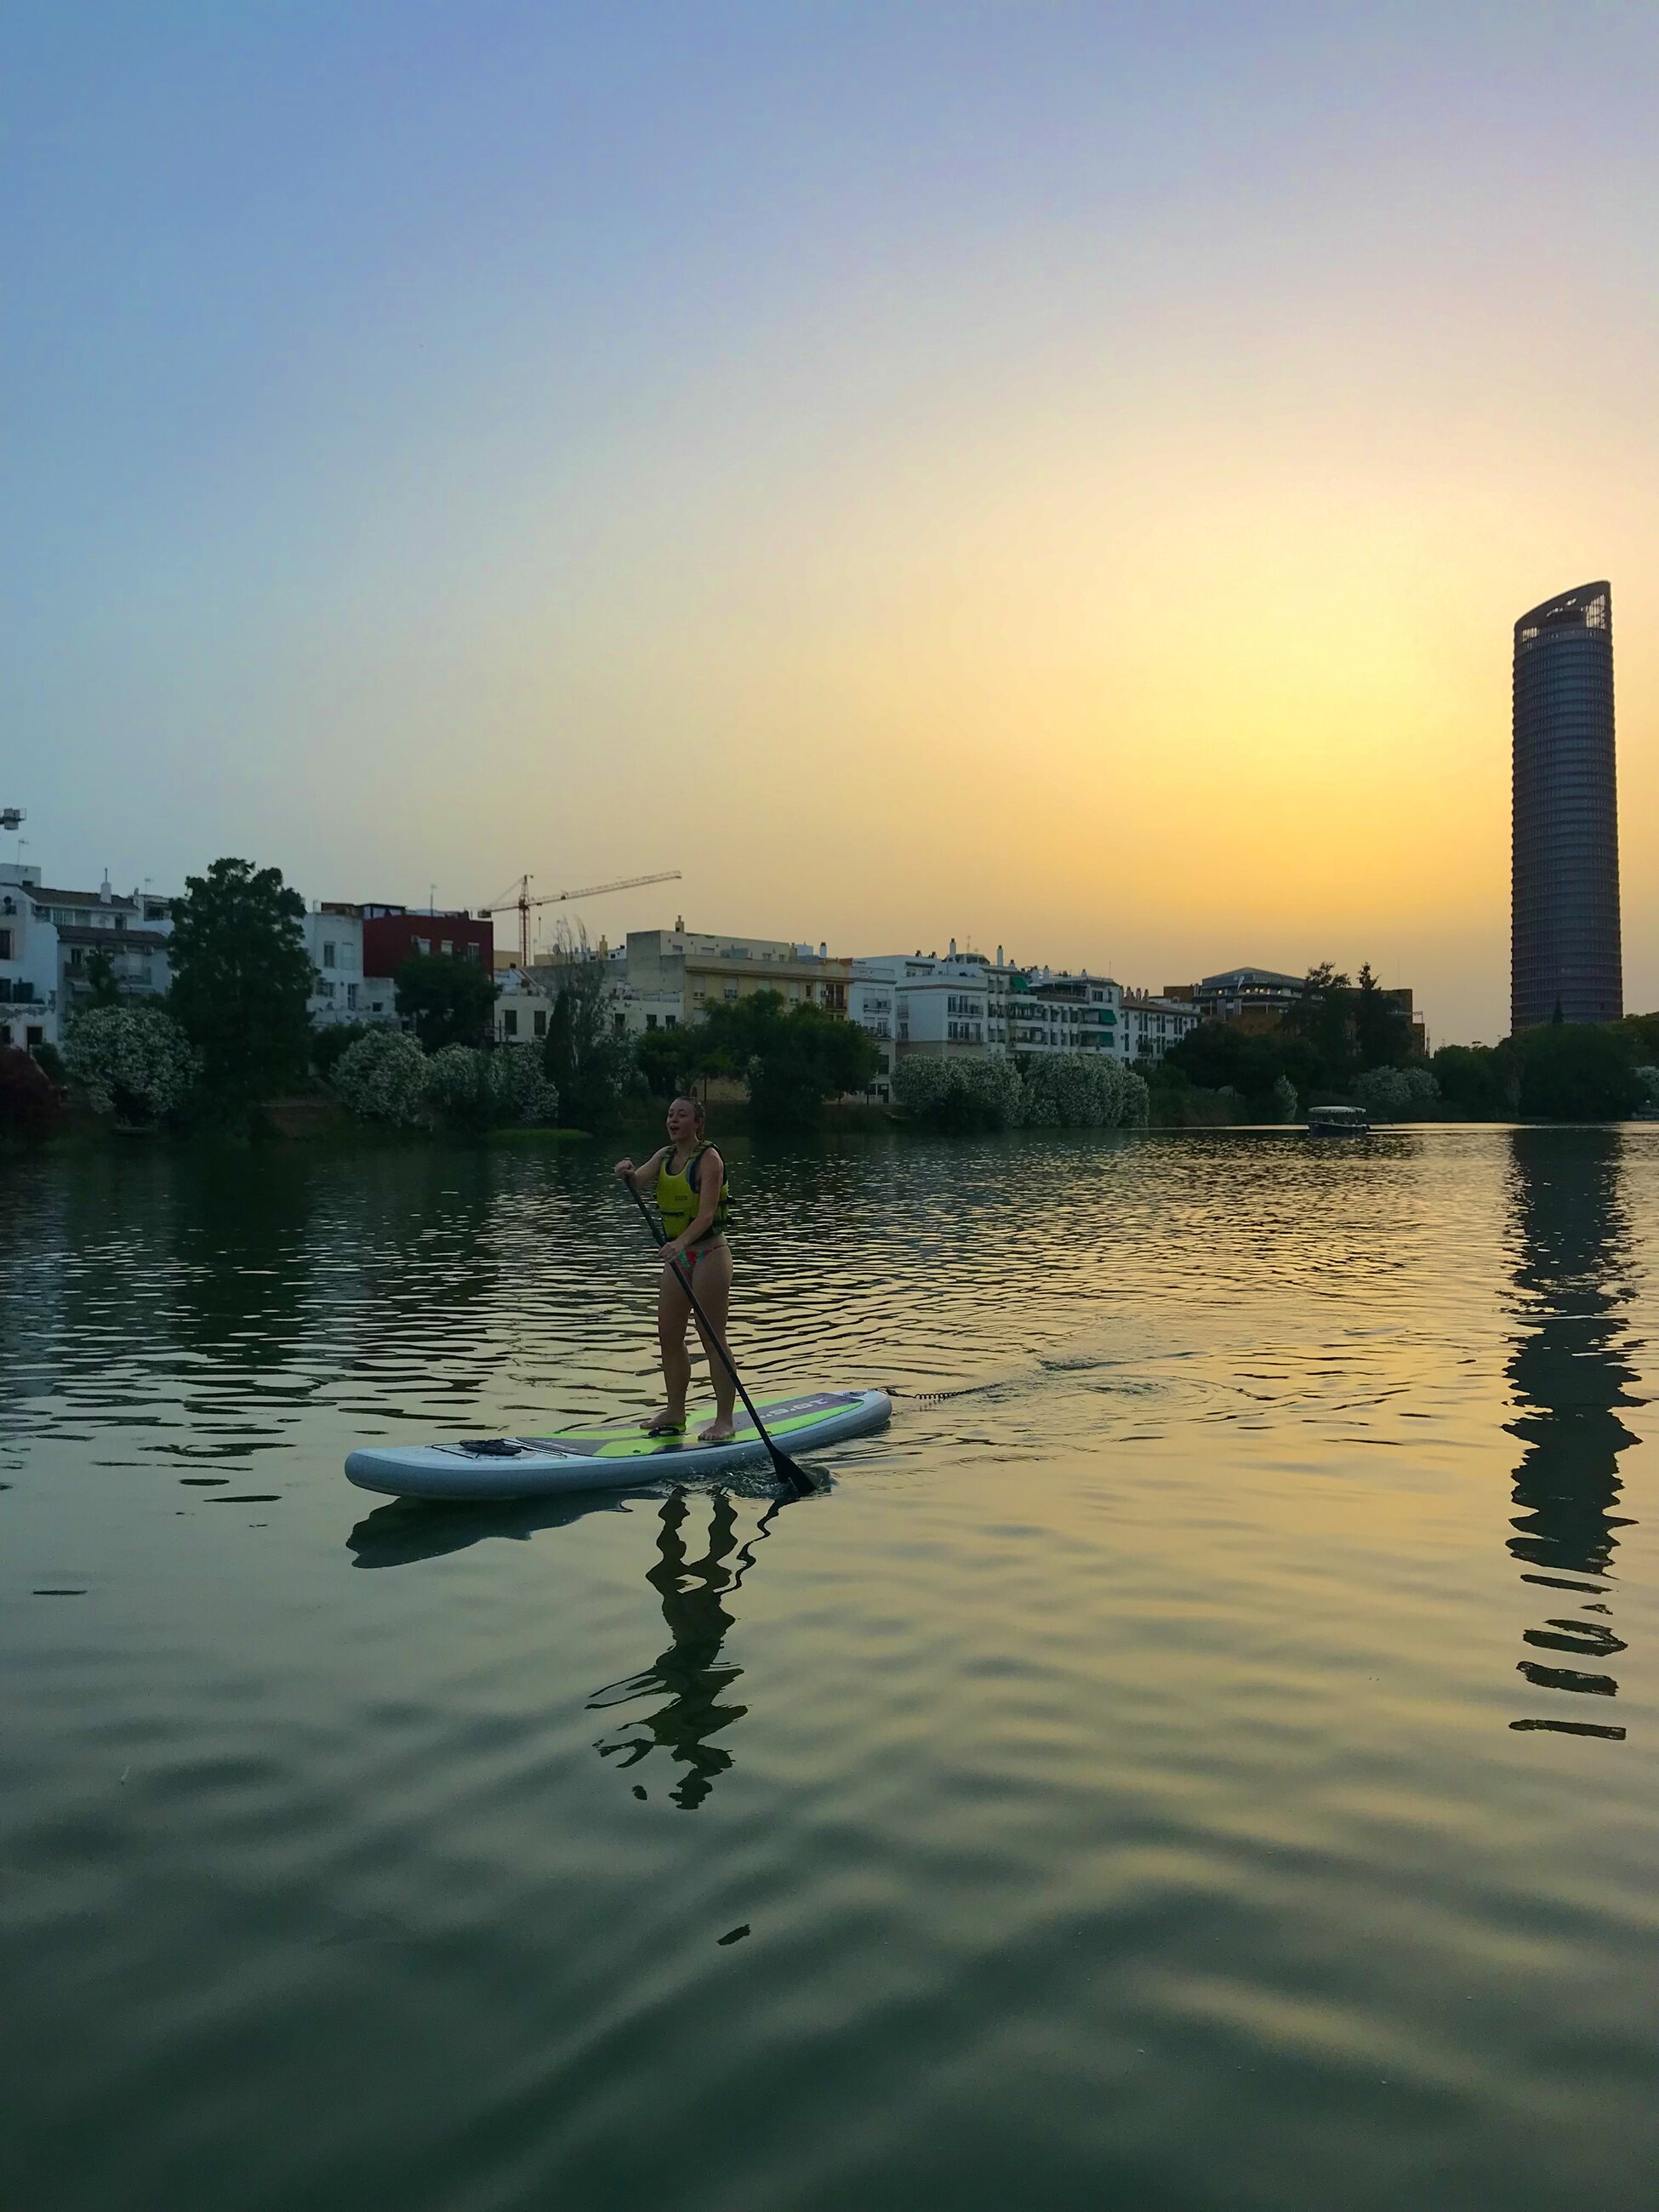 Paddle boarding on the Guadalquivir river at sunset